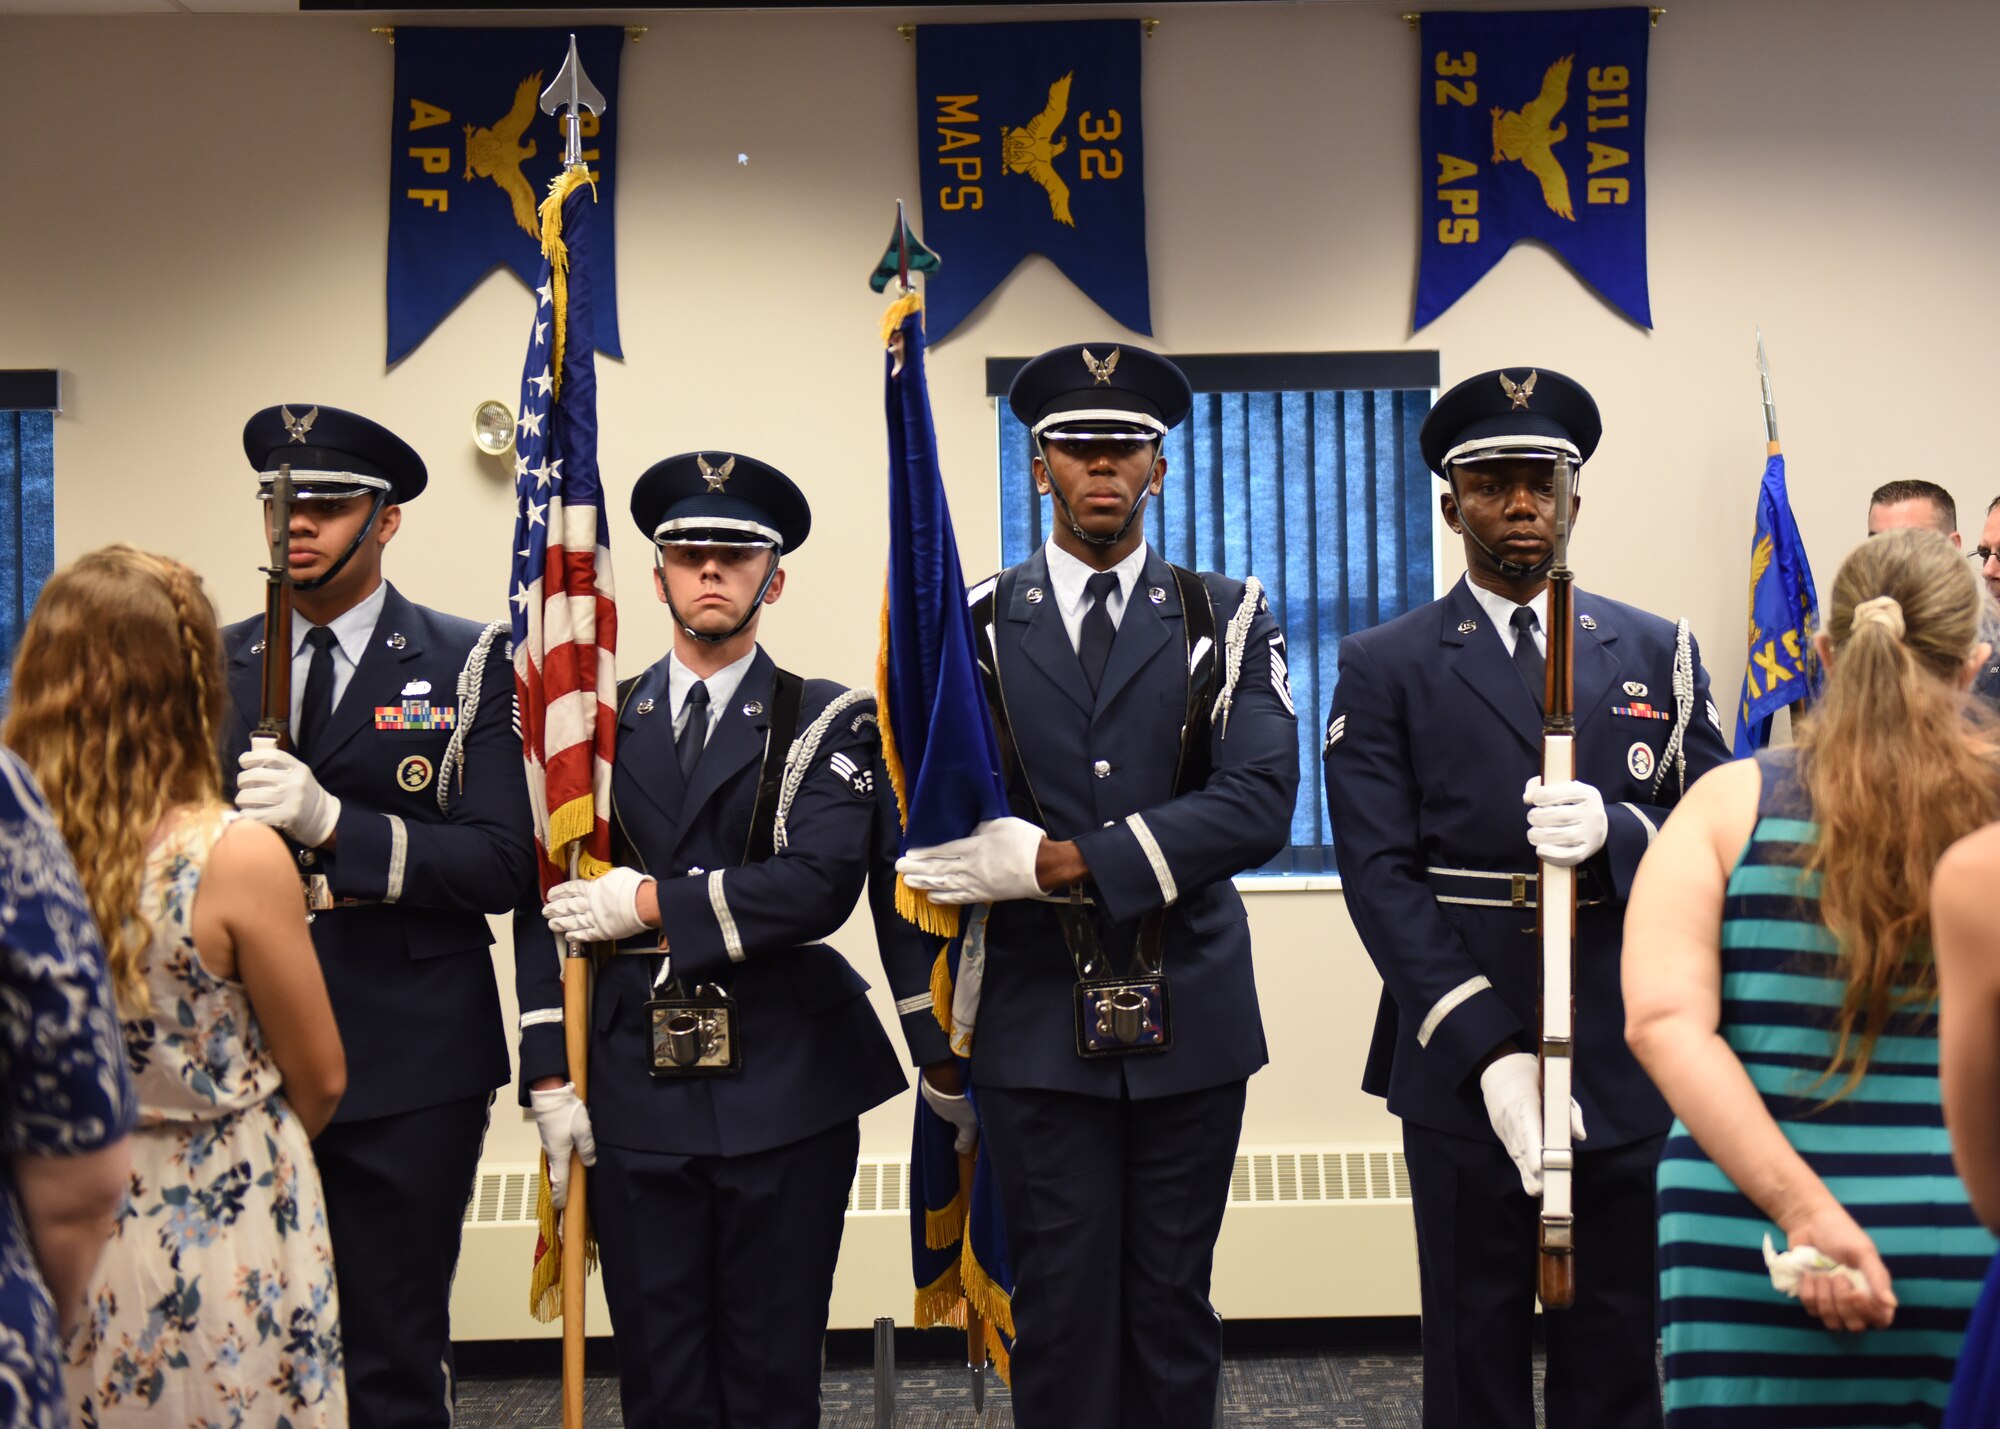 Airmen with the 911th Airlift Wing Honor Guard perform a flag ceremony during an assumption of command ceremony at the Pittsburgh International Airport Air Reserve Station, Pennsylvania Aug. 3, 2019.